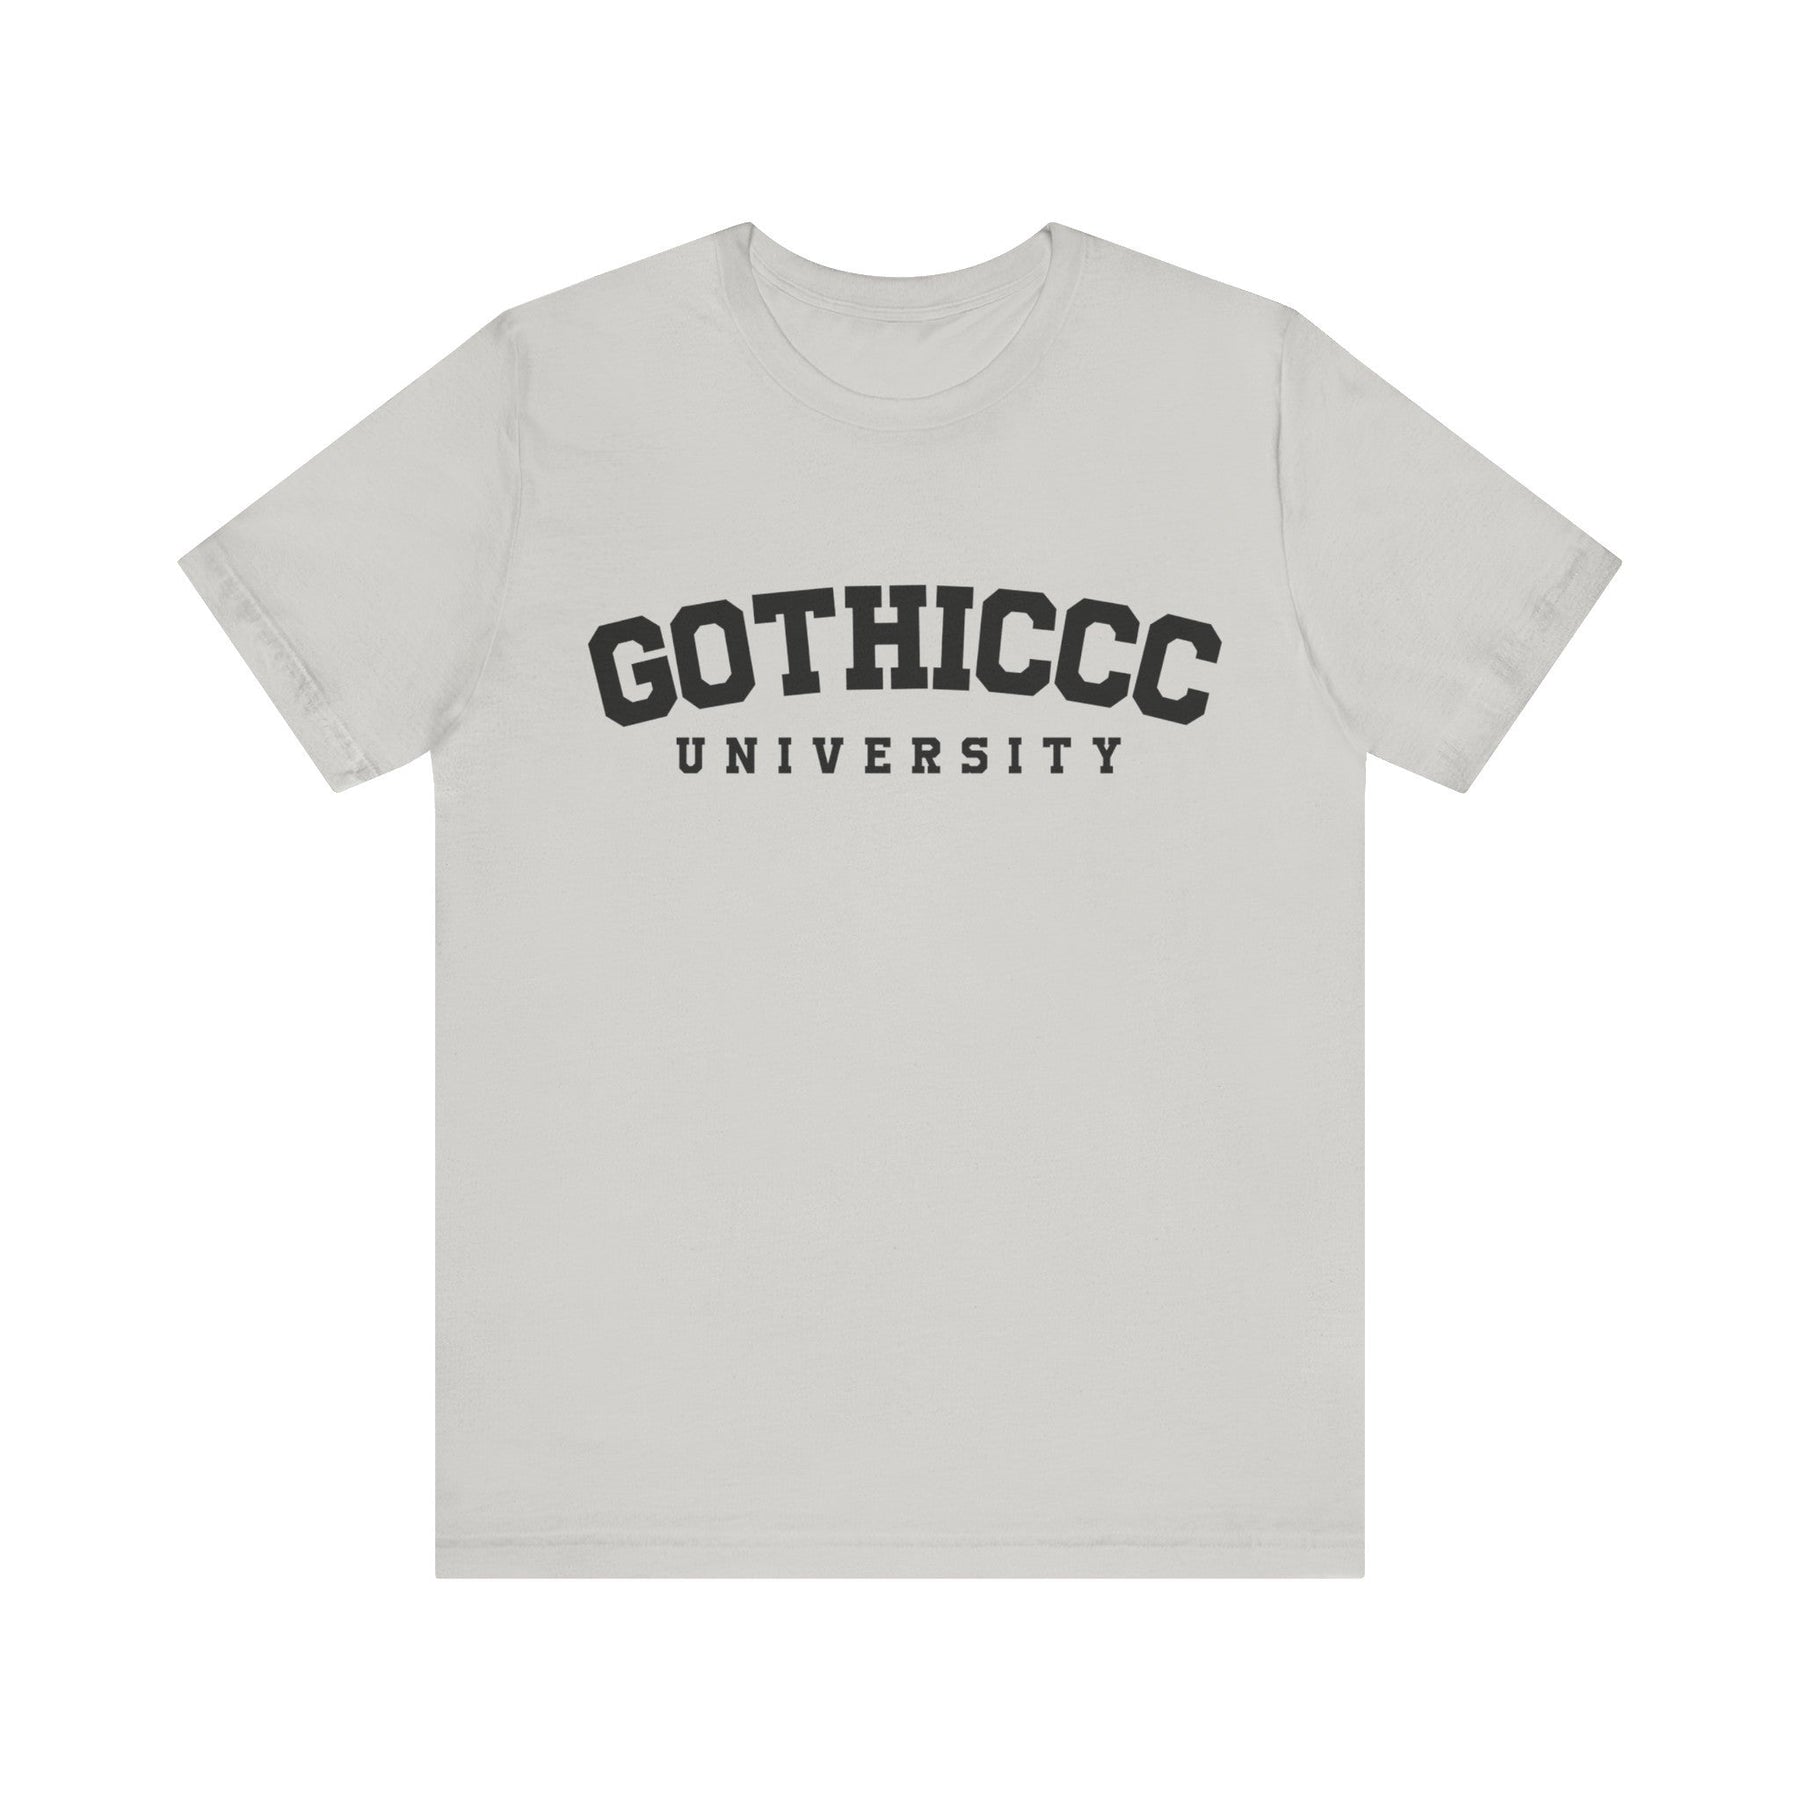 Gothiccc University Short Sleeve Tee - Goth Cloth Co.T - Shirt22306052052906877148